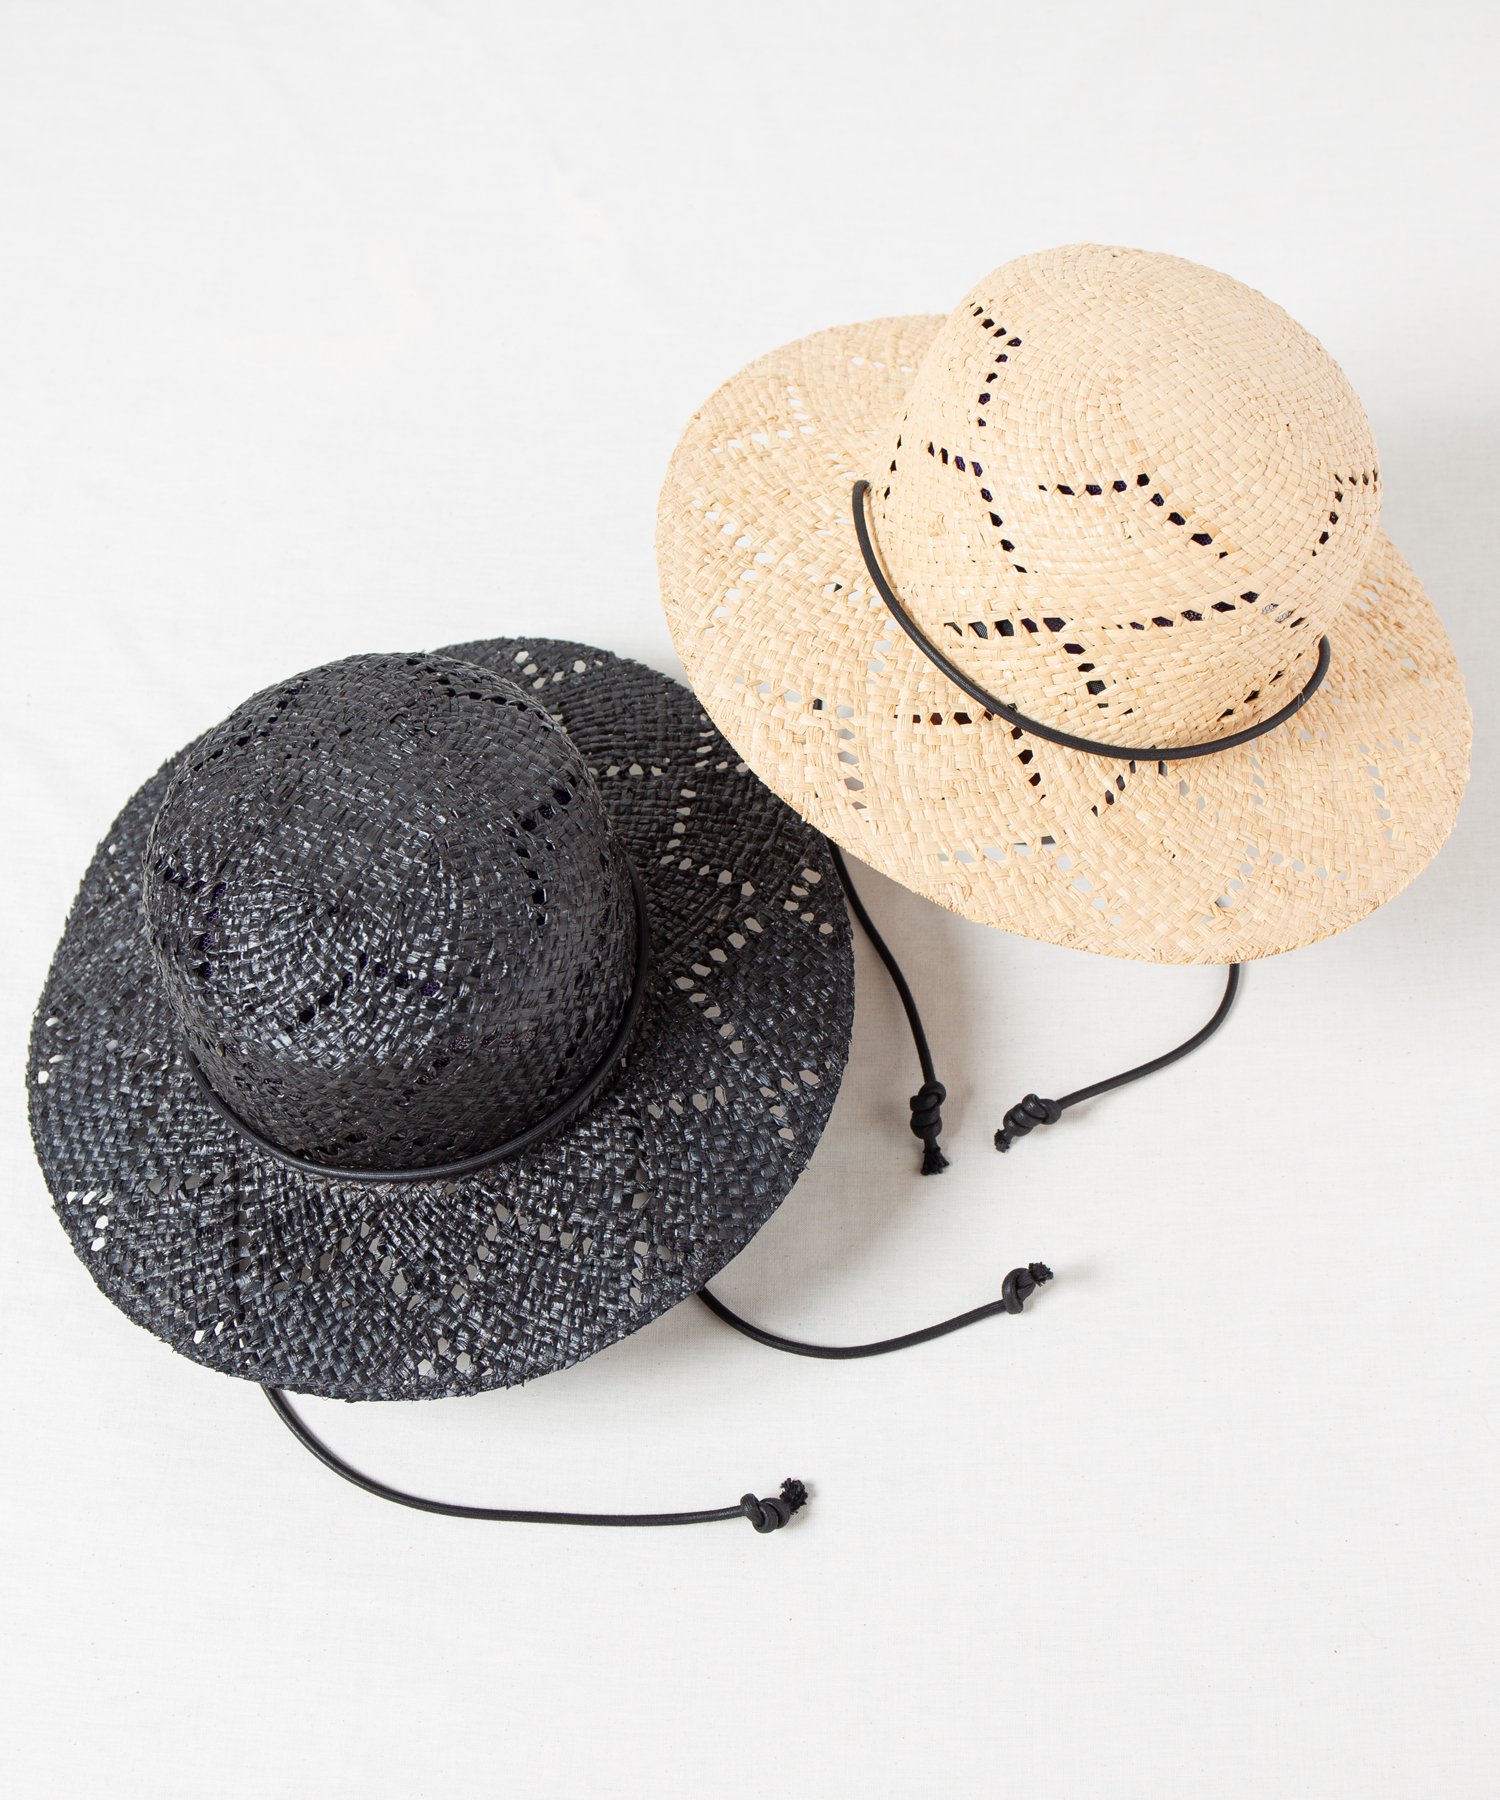 <img class='new_mark_img1' src='https://img.shop-pro.jp/img/new/icons15.gif' style='border:none;display:inline;margin:0px;padding:0px;width:auto;' />【Racal】 Openwork Raffia Hat / レイズストア限定 透かし編みラフィアハット